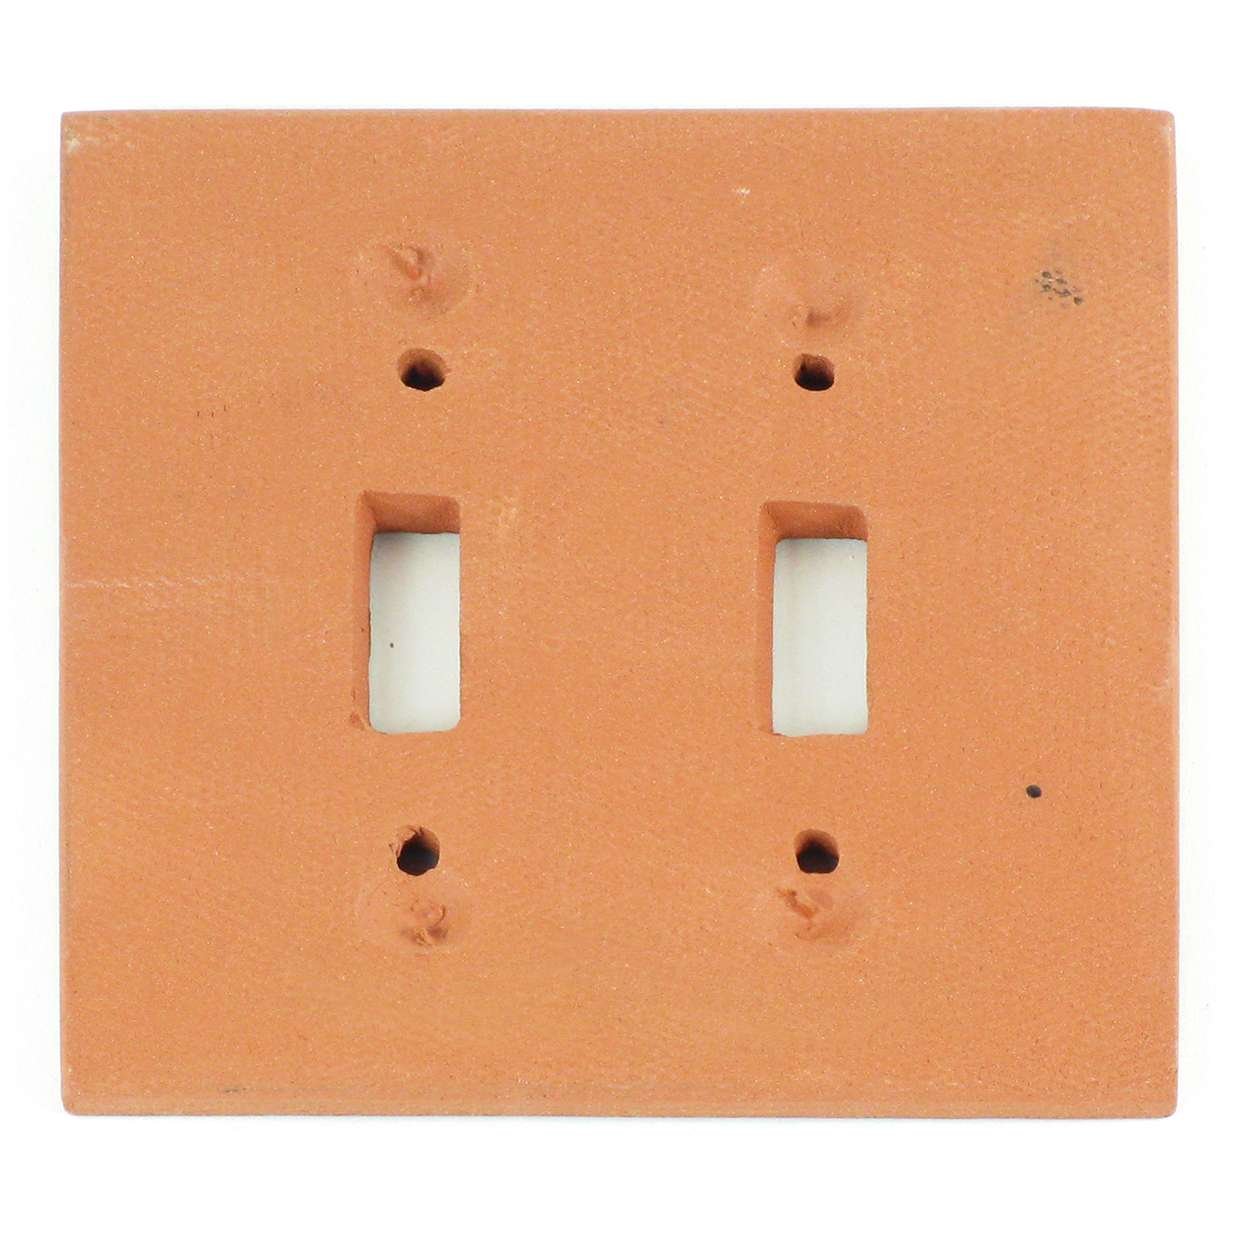 128064 - Terra Cotta Double Standard Switch Plate - Paint Horse